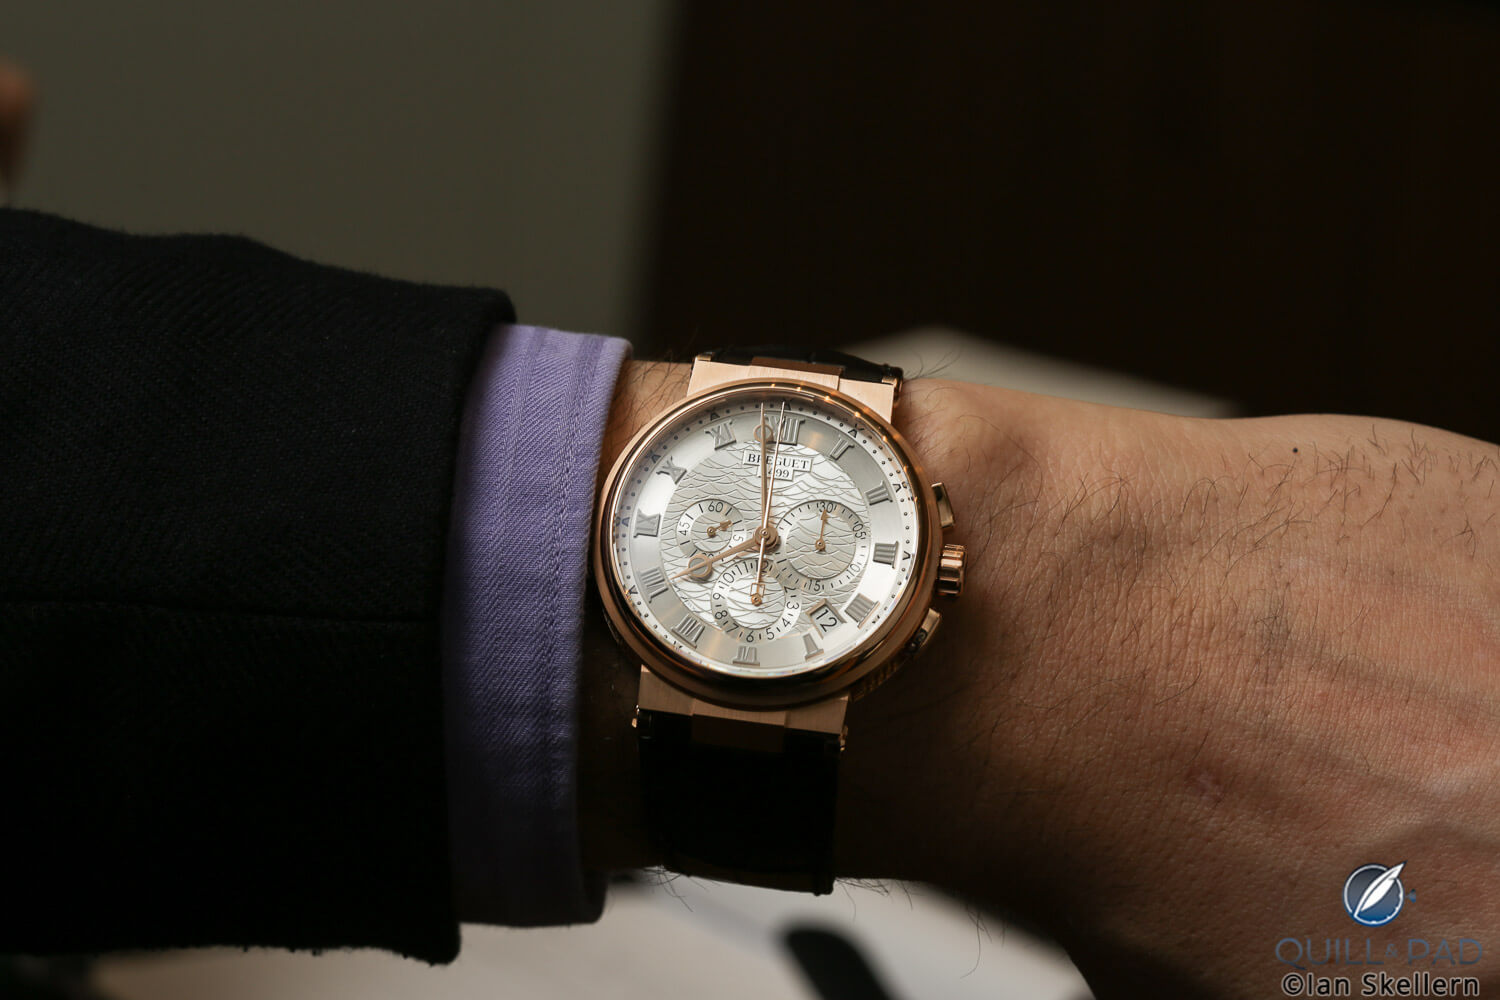 Breguet Marine Chronographe Reference 5527 in pink gold